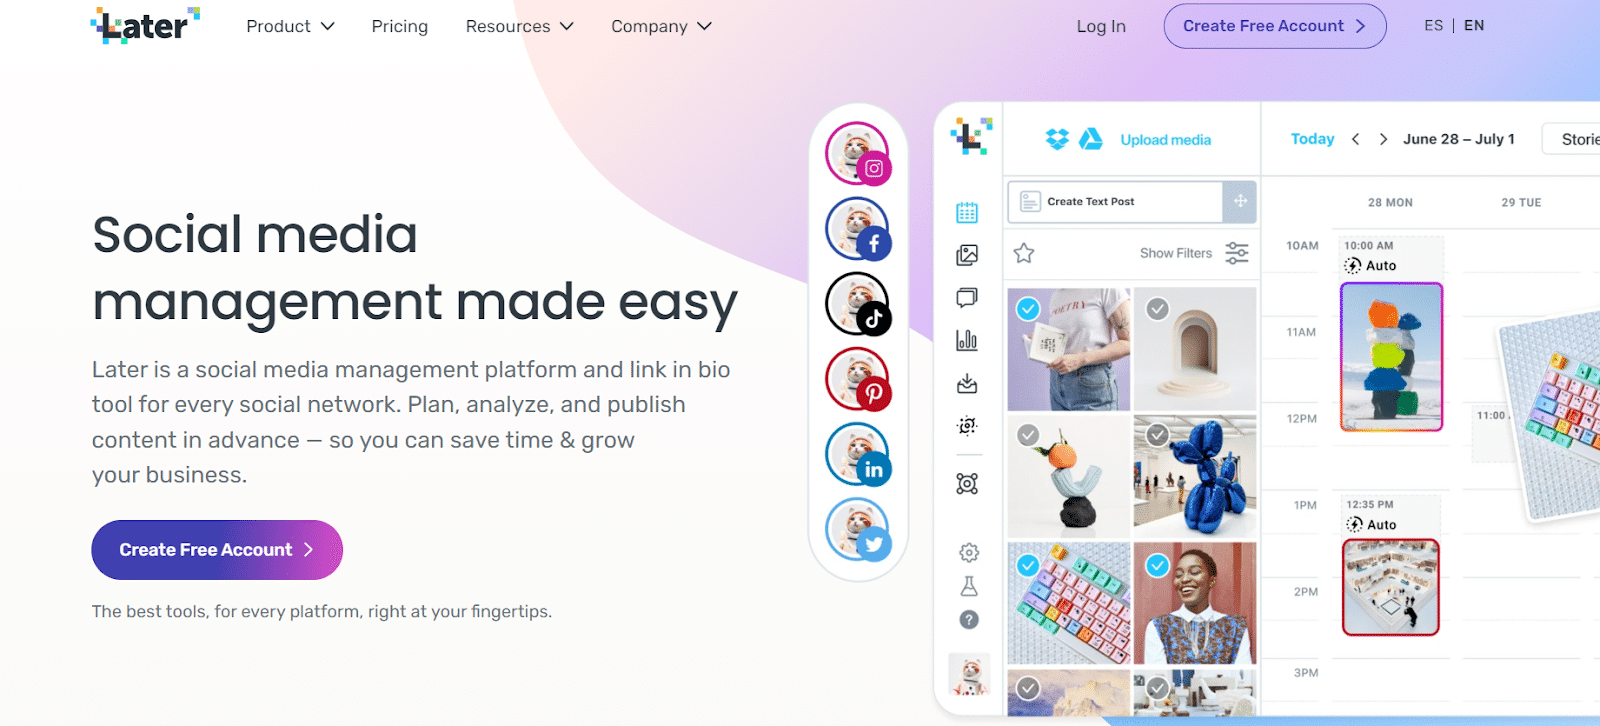 Later: An All-In-One Social Media Management Tool For Influencers And Marketers